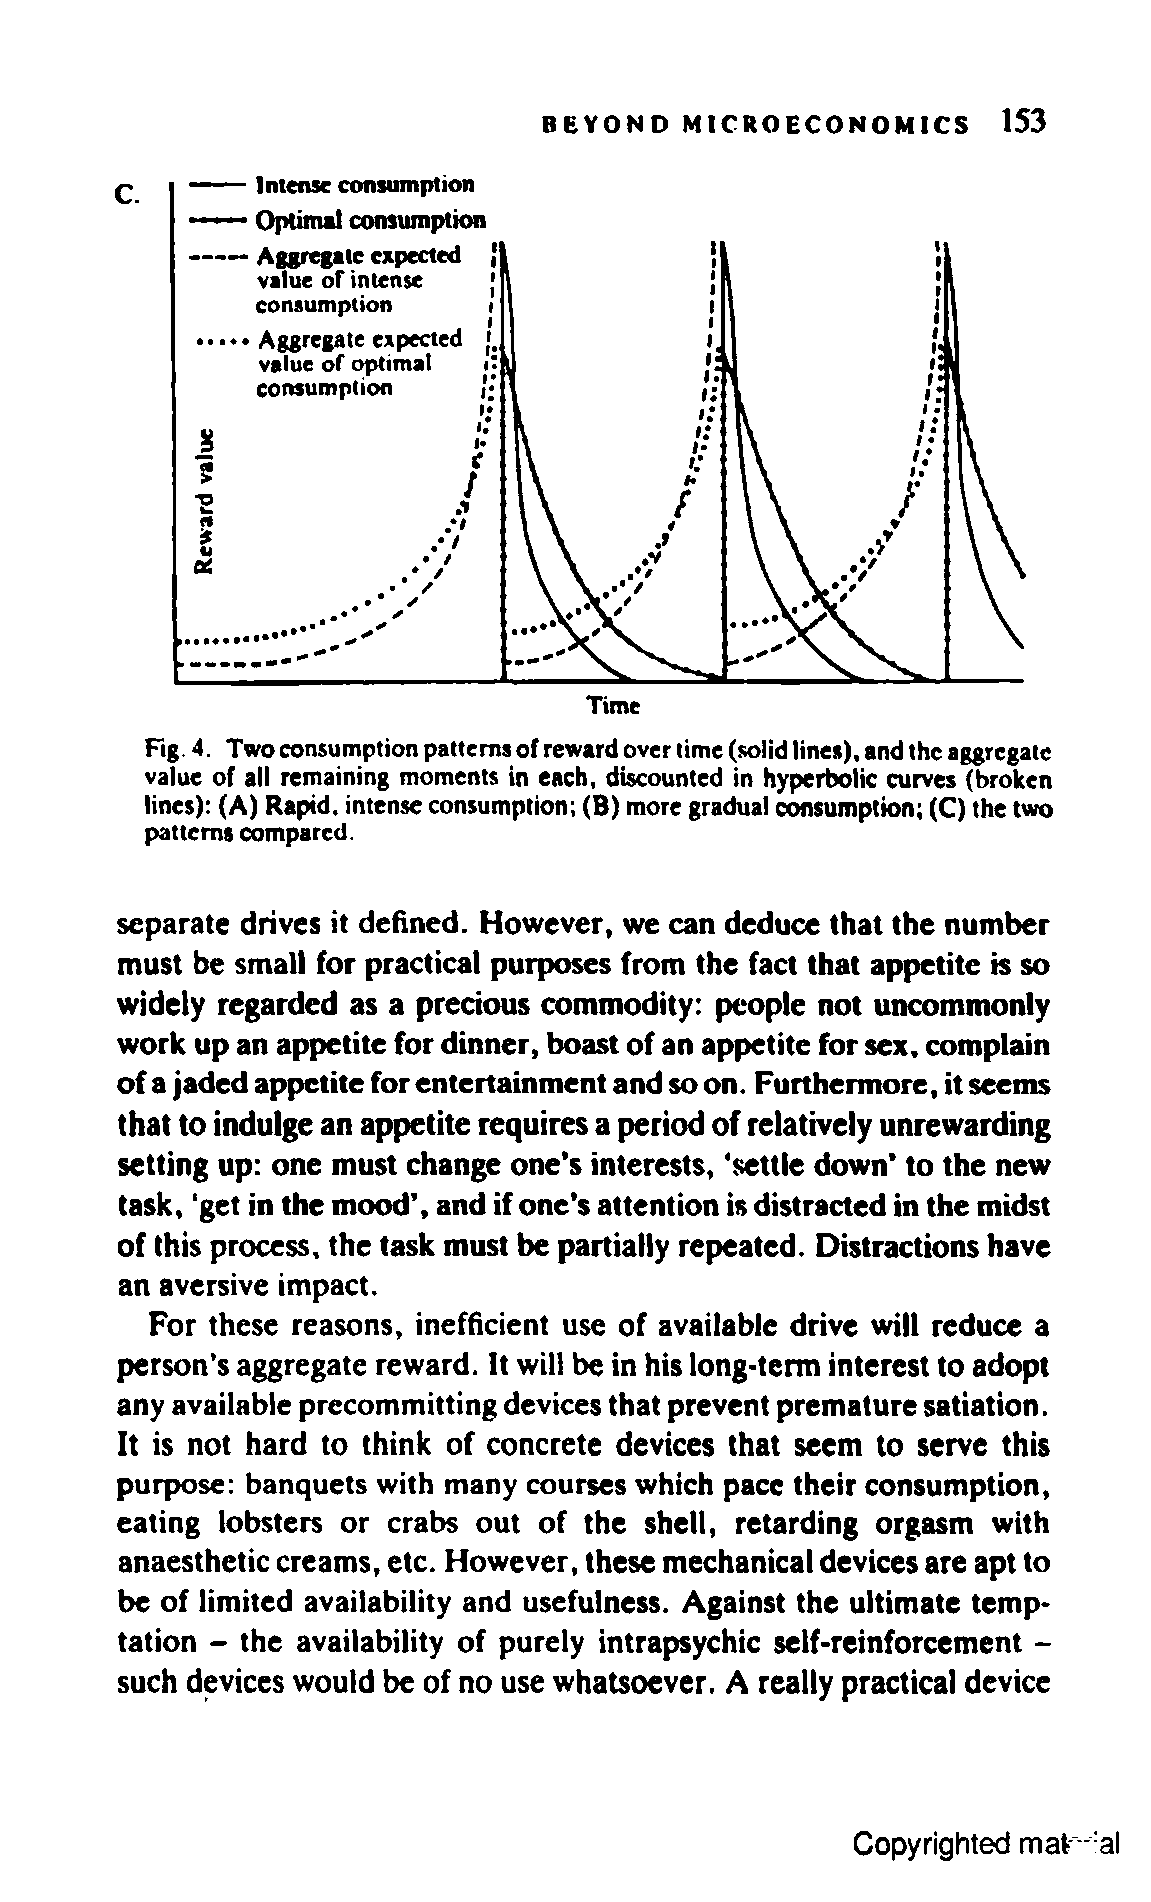 Fig. 4. Two consumption patterns of reward over time (solid lines), and the aggregate value of all remaining moments in each, discounted in hyperbolic curves (broken lines) (A) Rapid, intense consumption (B) more gradual consumption (C) the two patterns compared.